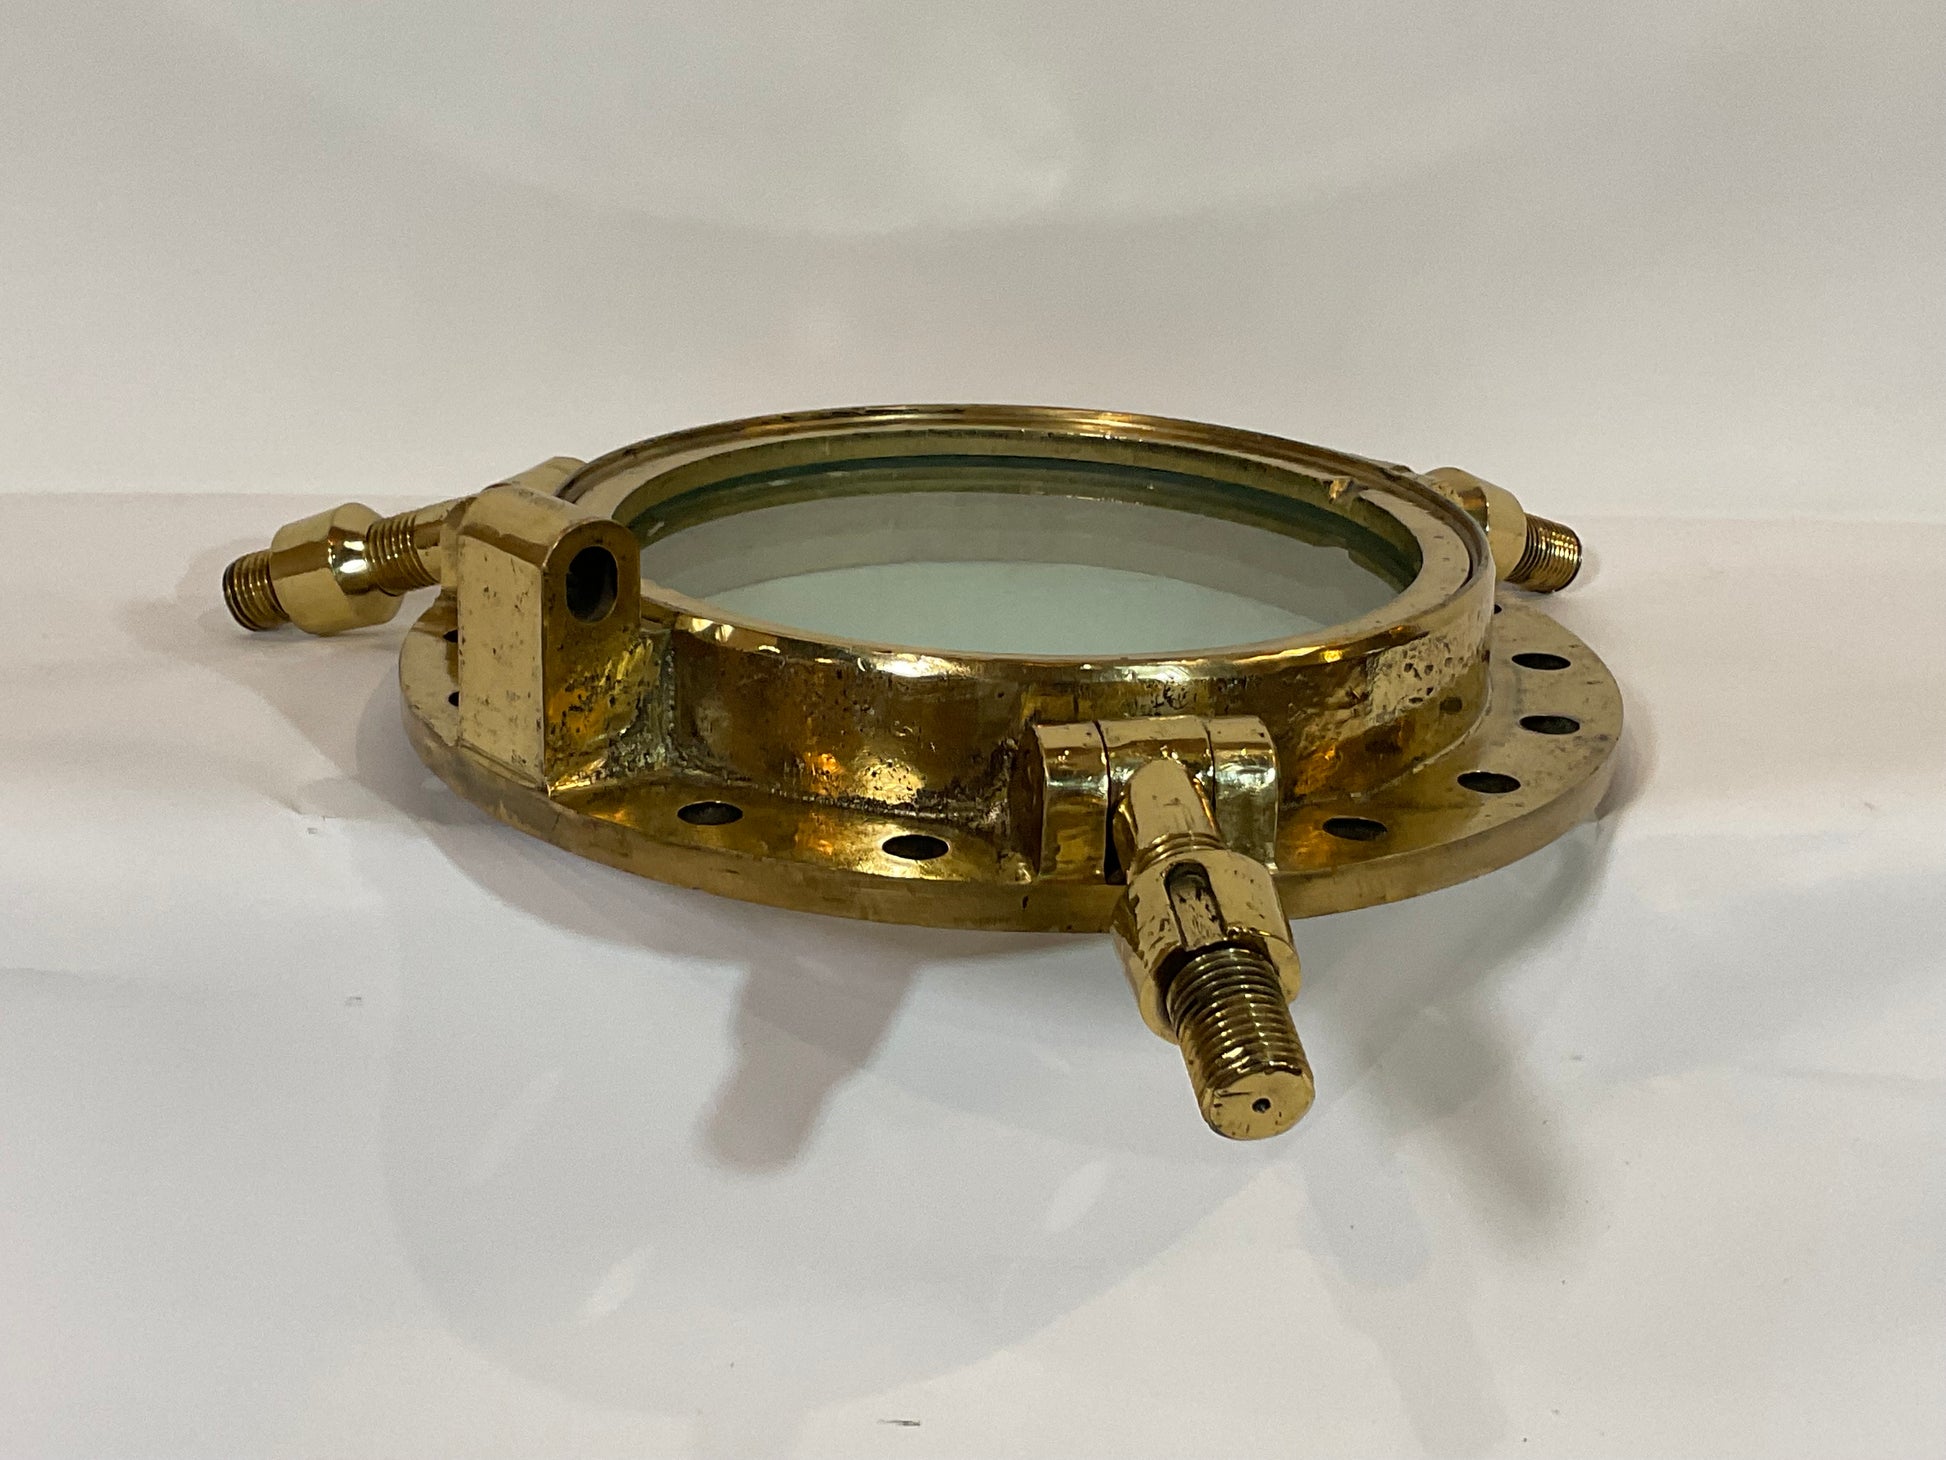 Solid Brass Ships Porthole - Lannan Gallery